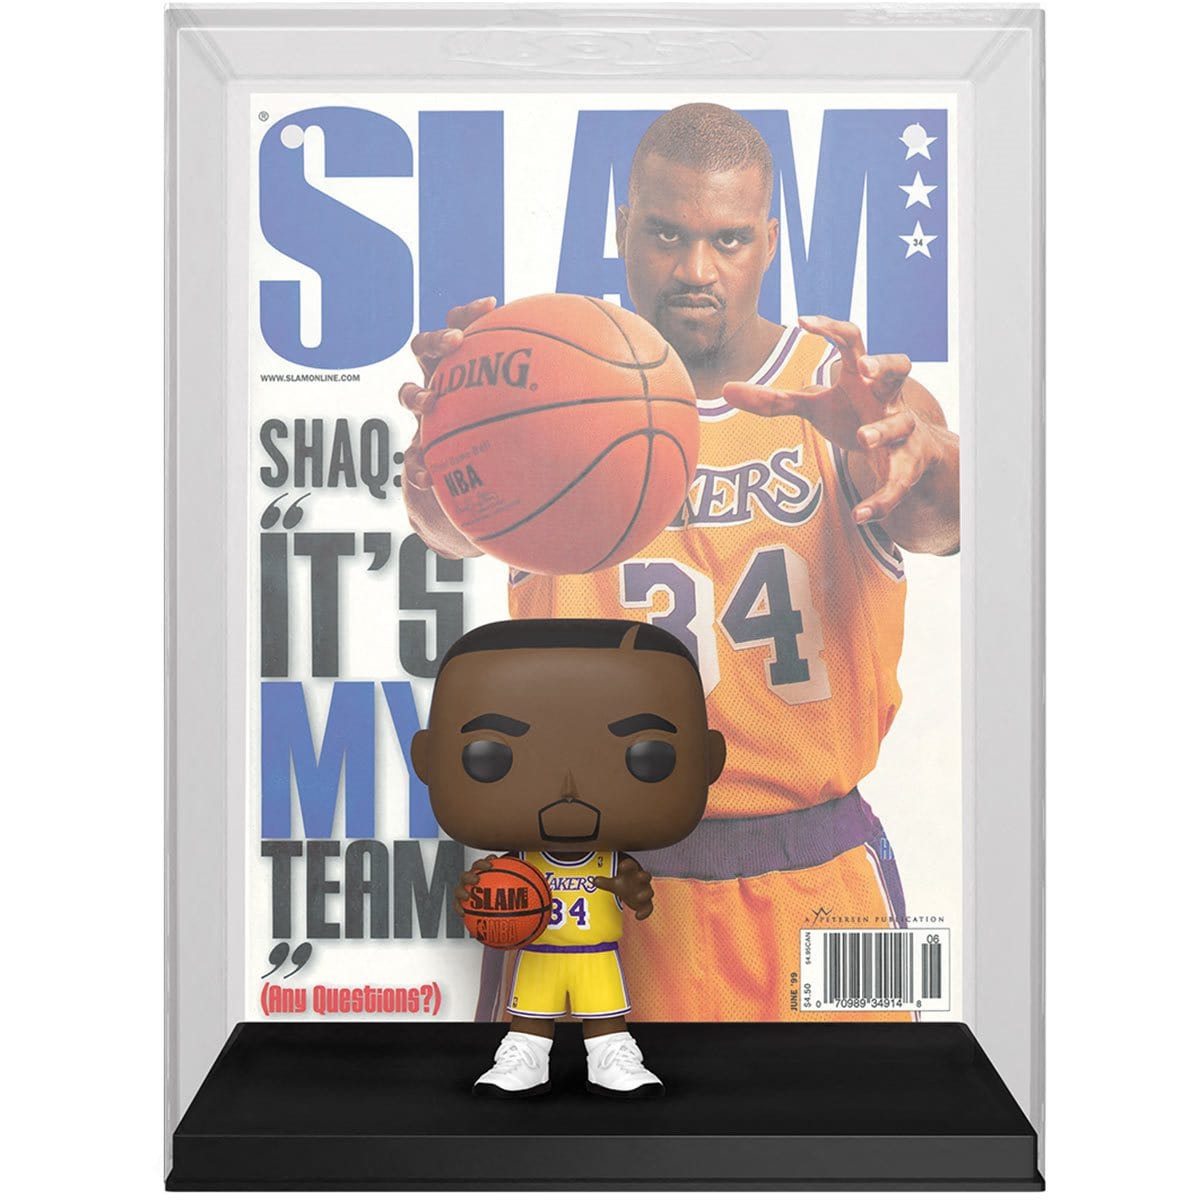 Funko Pop Star Sports Basketball Player Kobe Stephen Curry Vinyl Action  Figure Collectible Model Toy For Fans From Tfboys13, $9.05